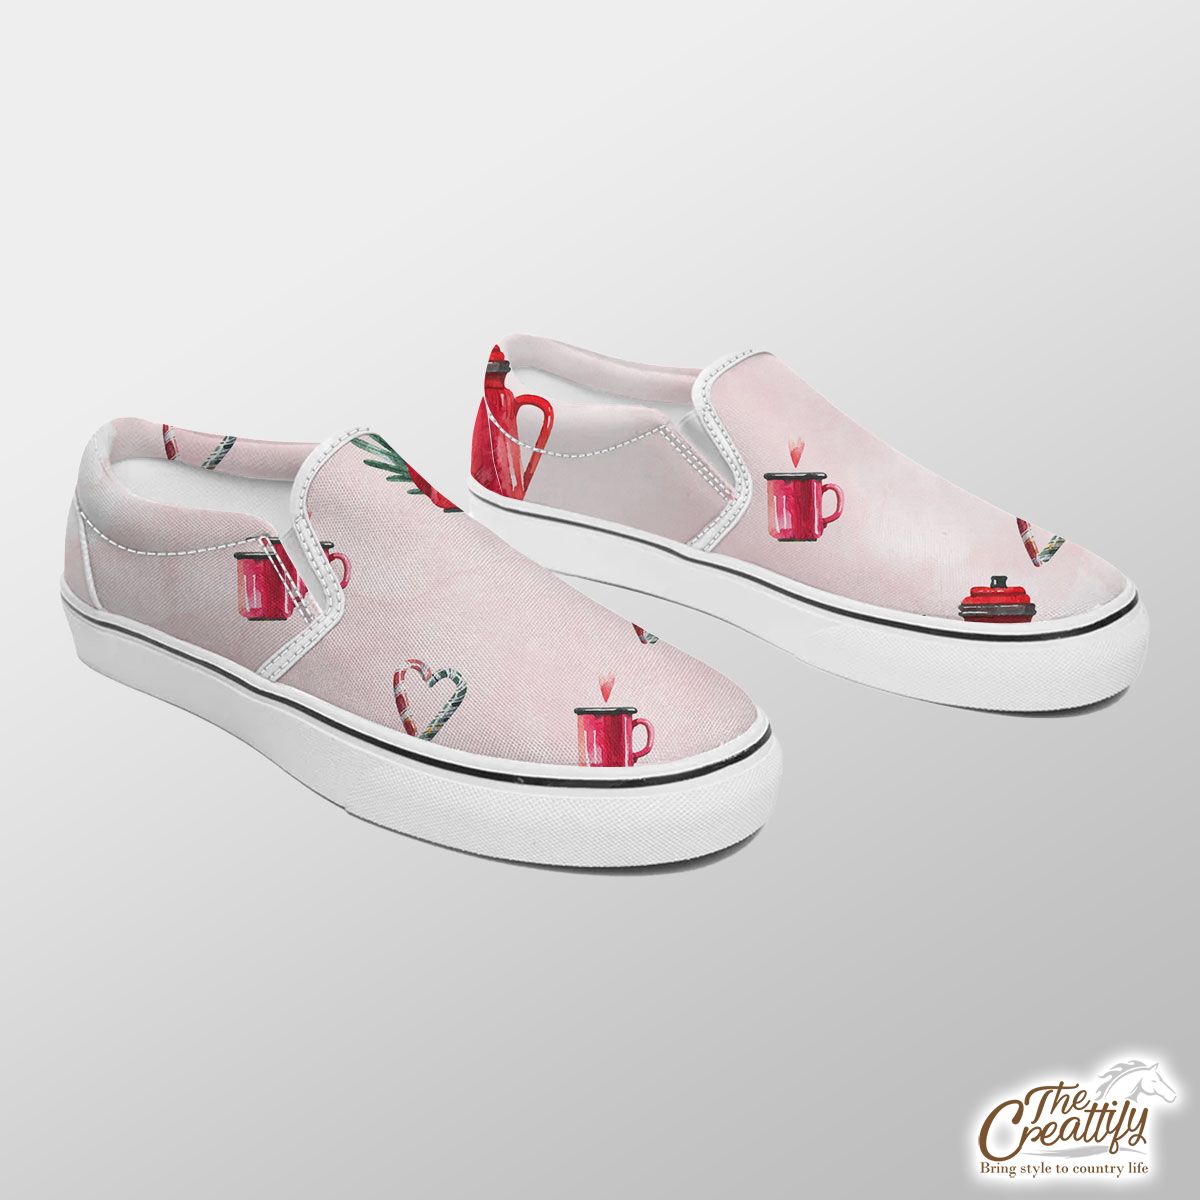 Watercolor Christmas Red Teapots Candy Canes Pattern Slip On Sneakers